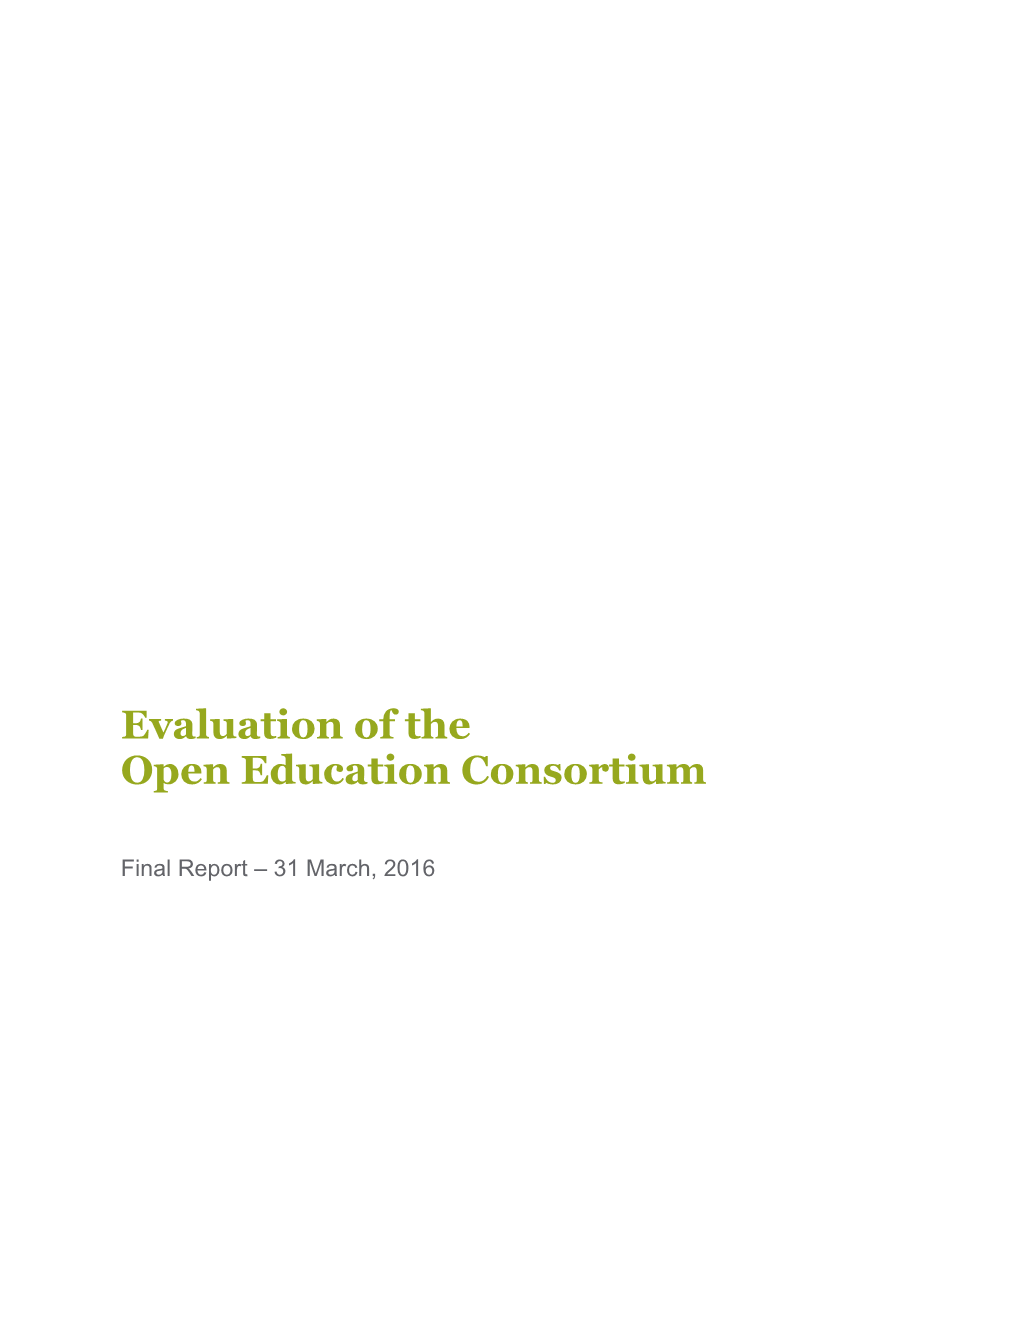 Evaluation of the Open Education Consortium